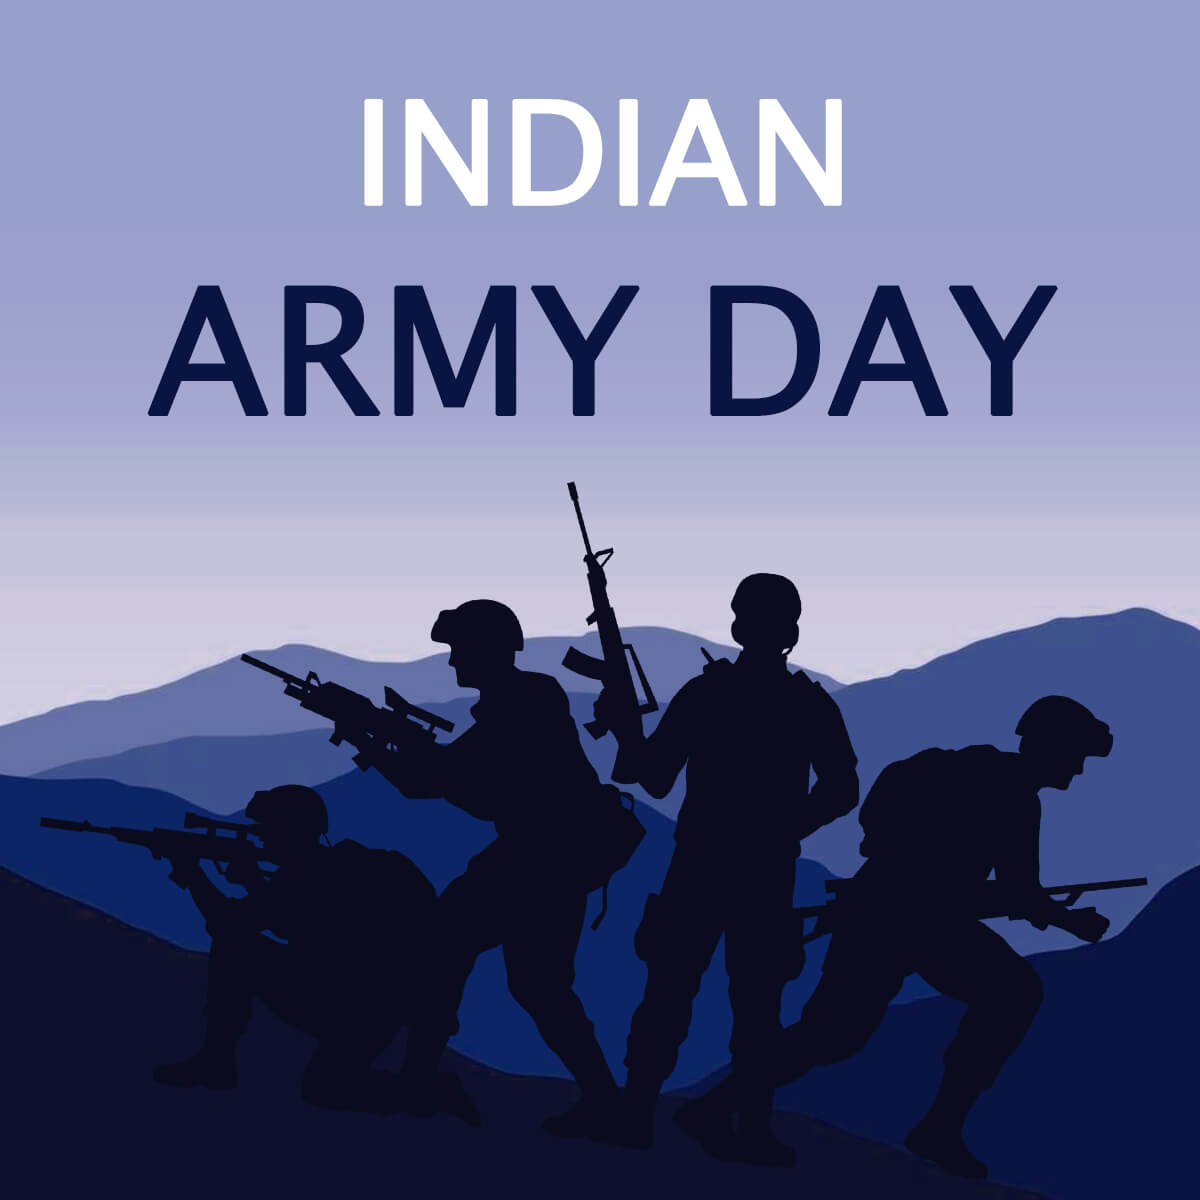 Indian army day position design design image - Pngfreepic